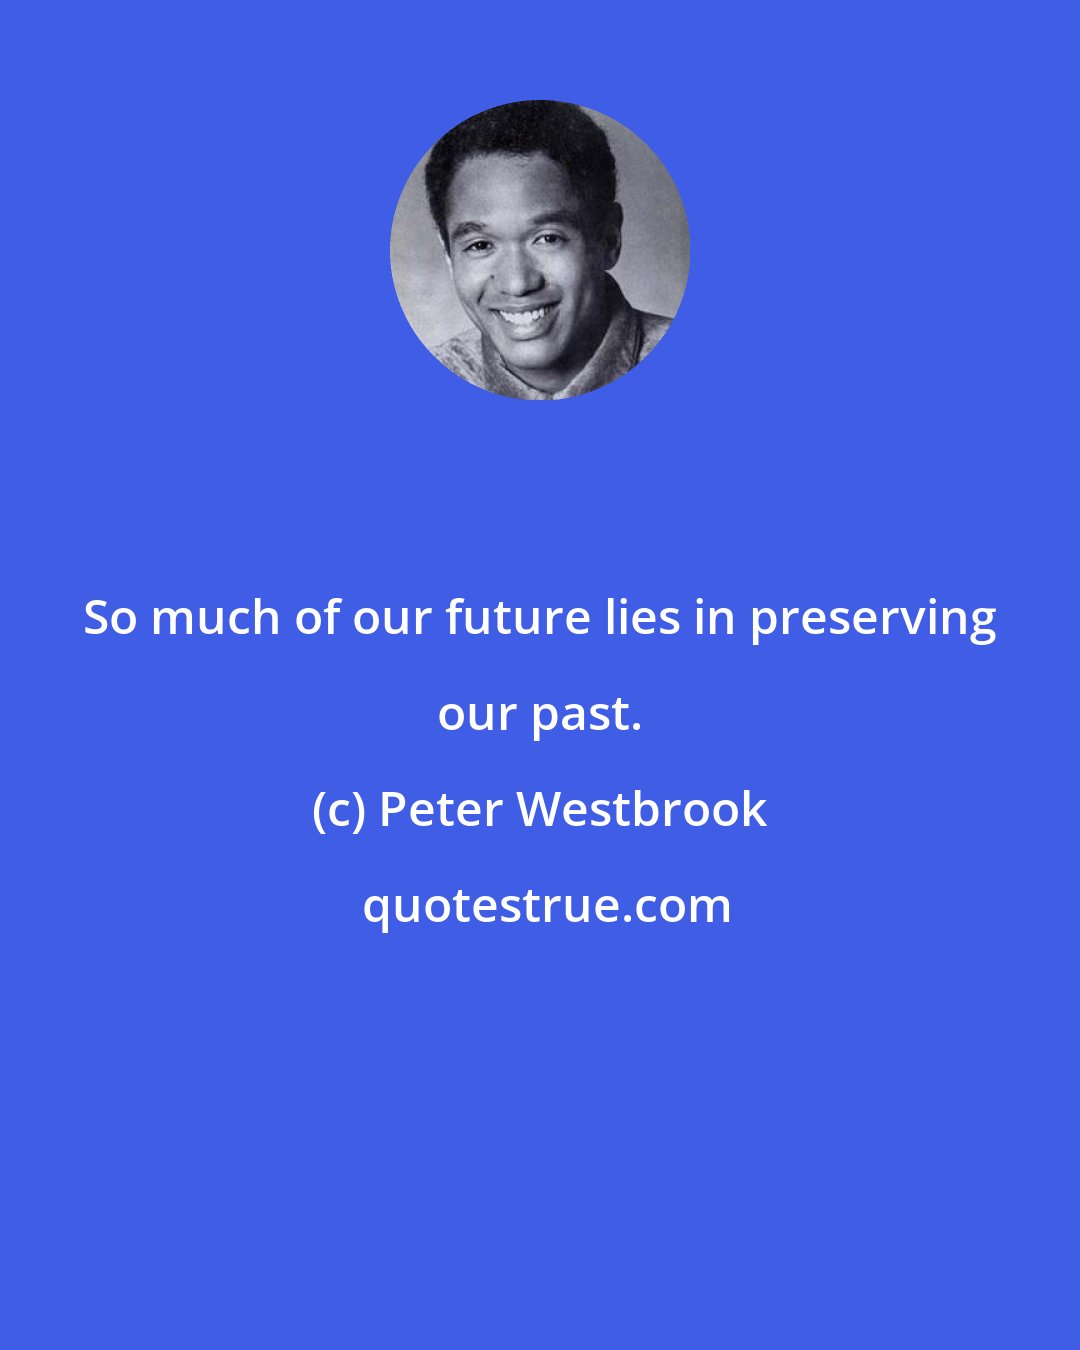 Peter Westbrook: So much of our future lies in preserving our past.